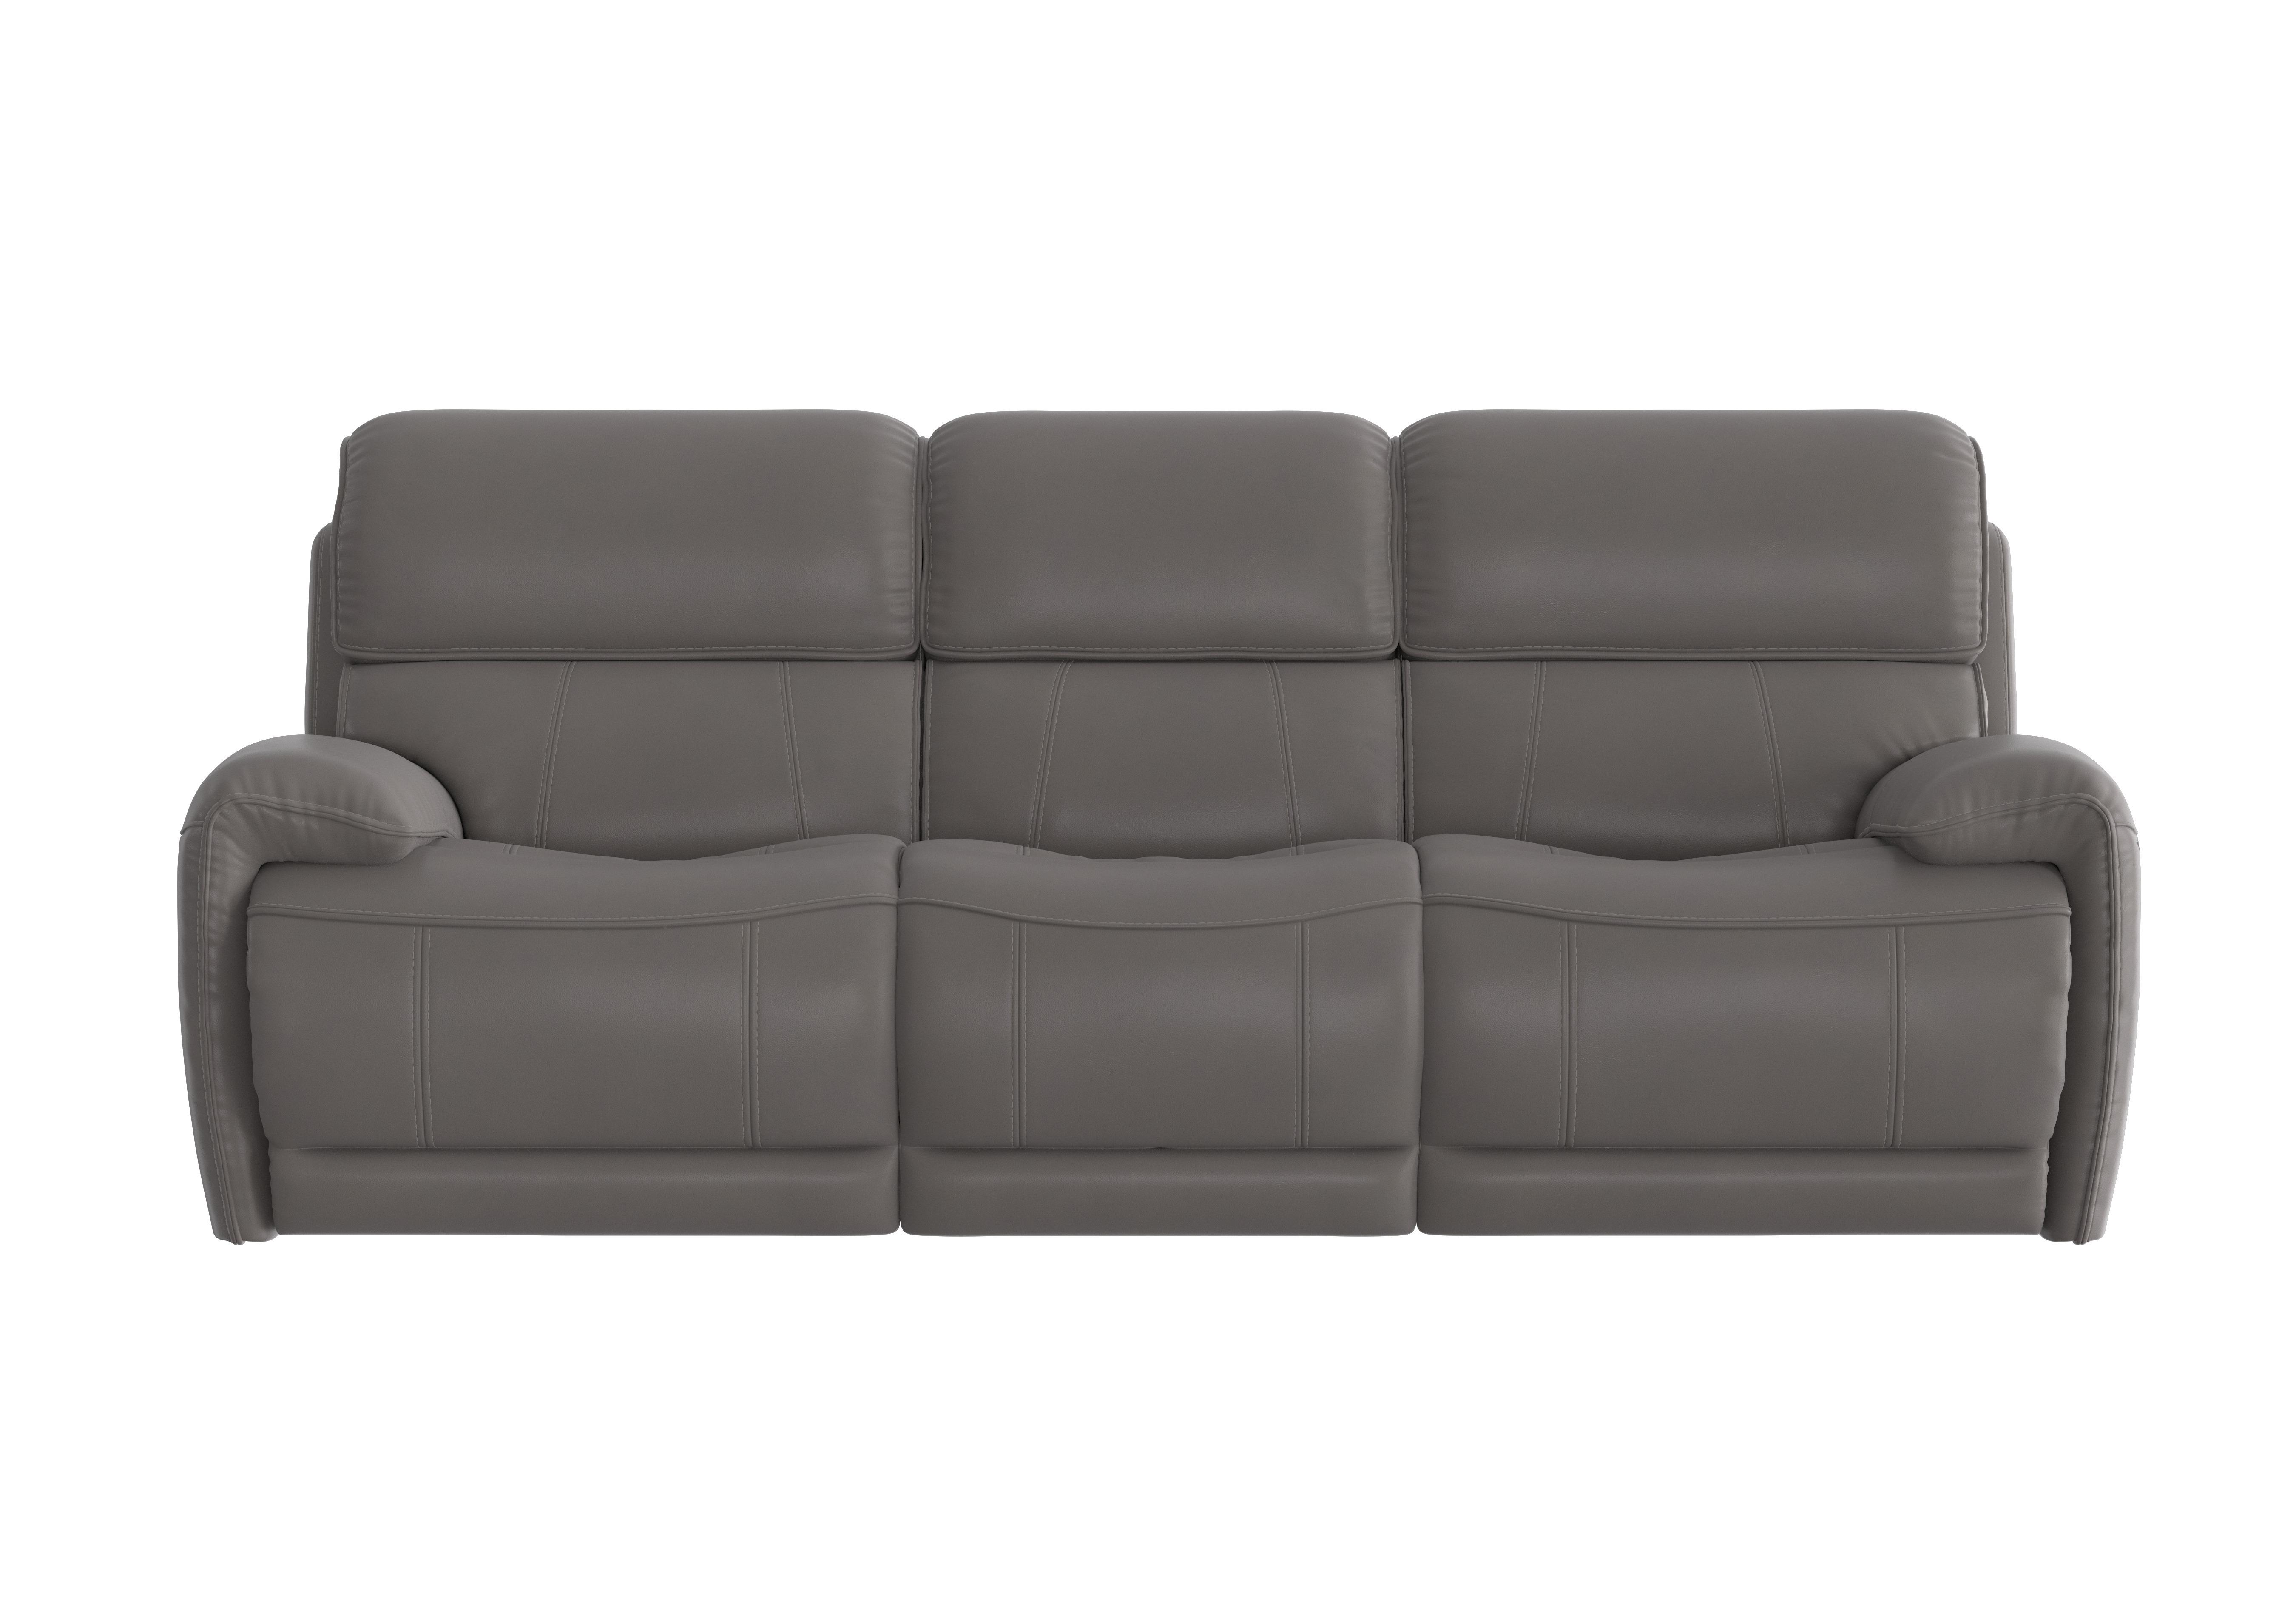 Link 3 Seater Leather Power Recliner Sofa with Power Headrests in Bv-042e Elephant on Furniture Village